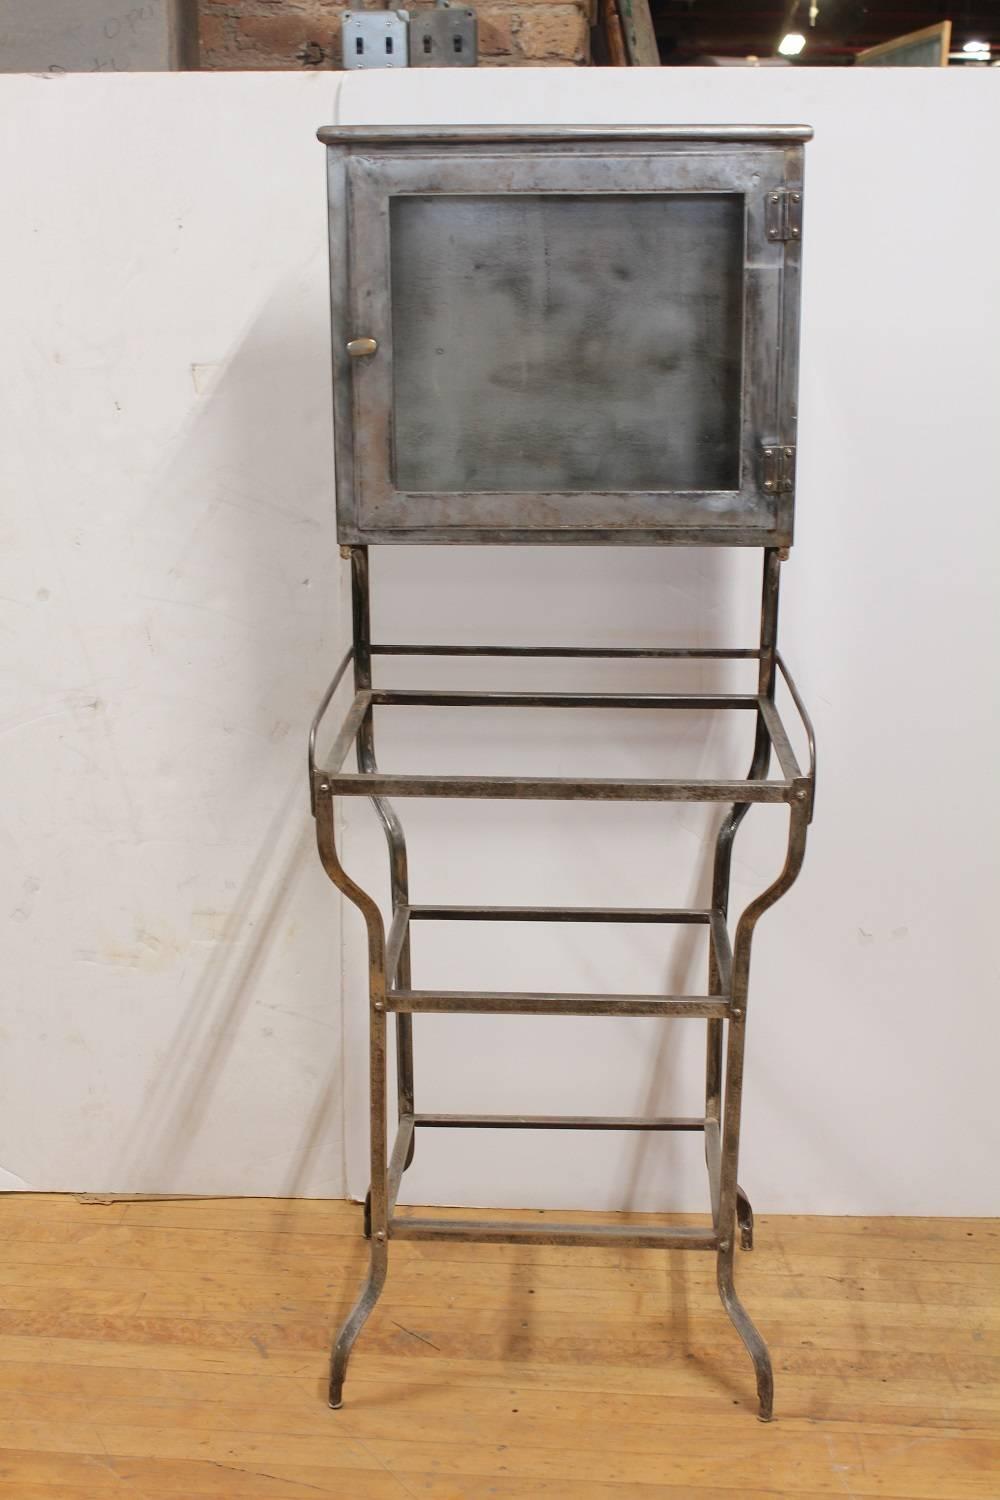 Antique American medical metal cabinet with glass shelves.